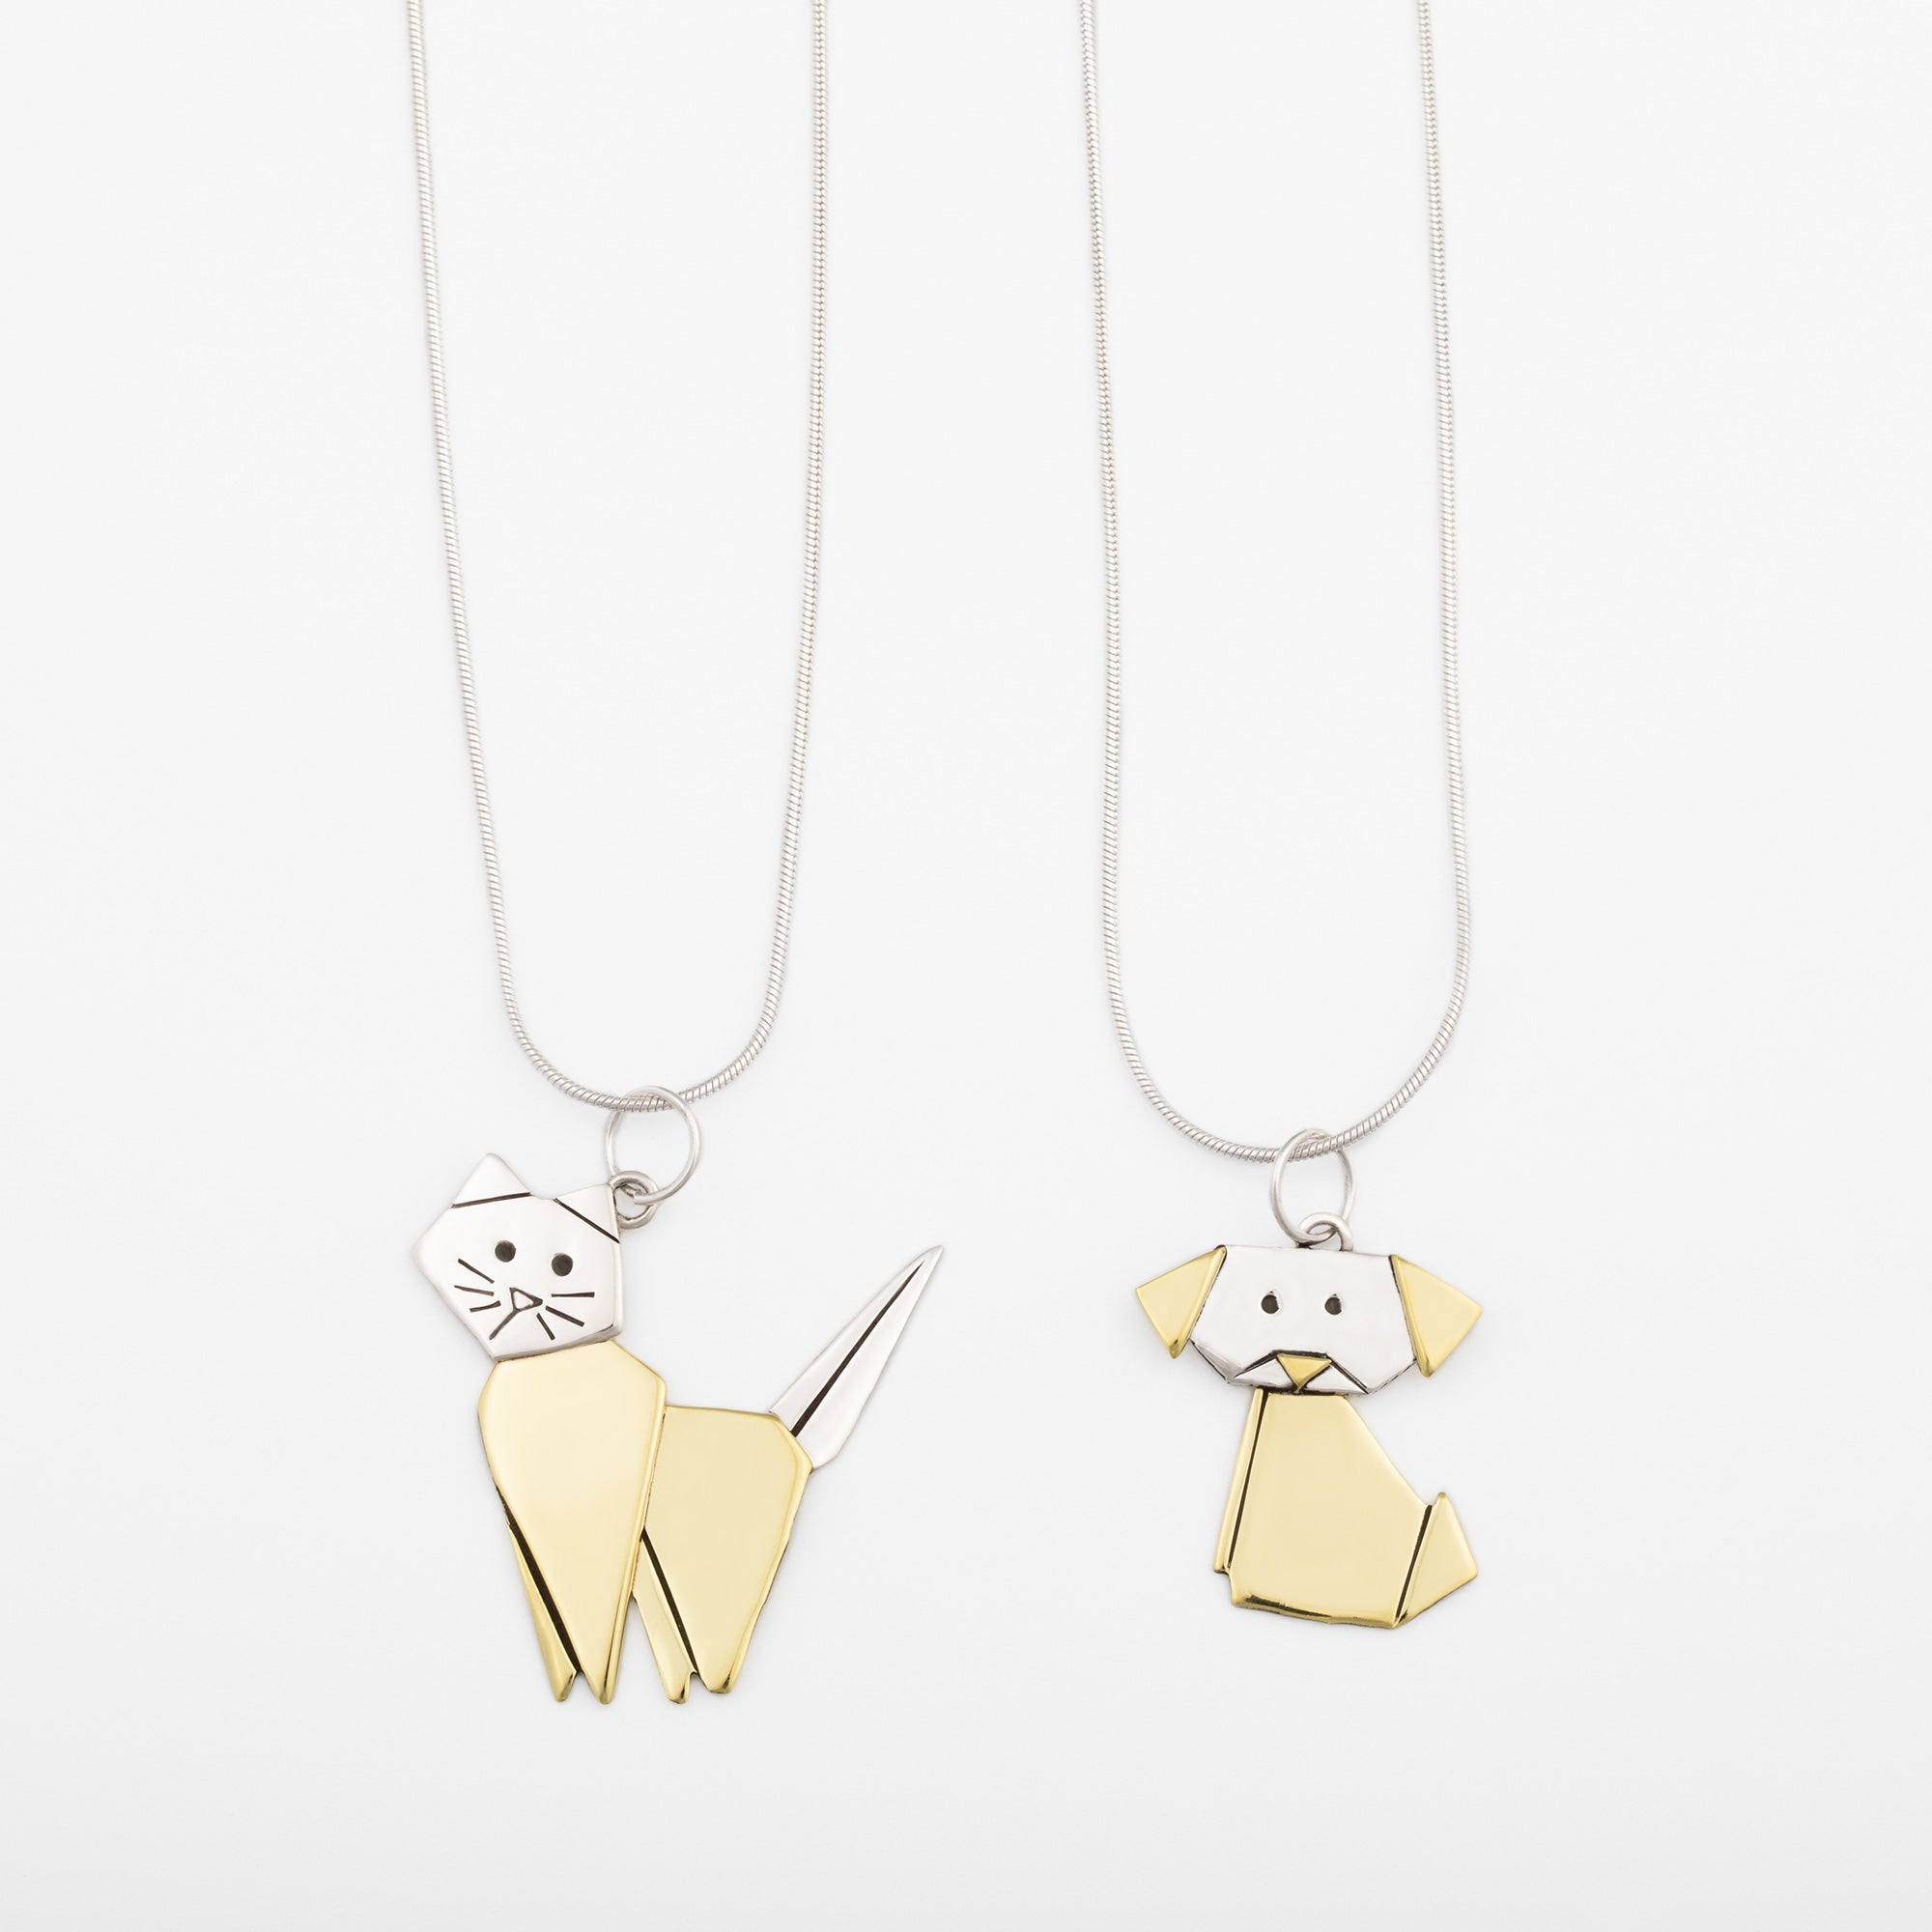 Origami Pet Necklace - Dog - With Sterling Cable Chain